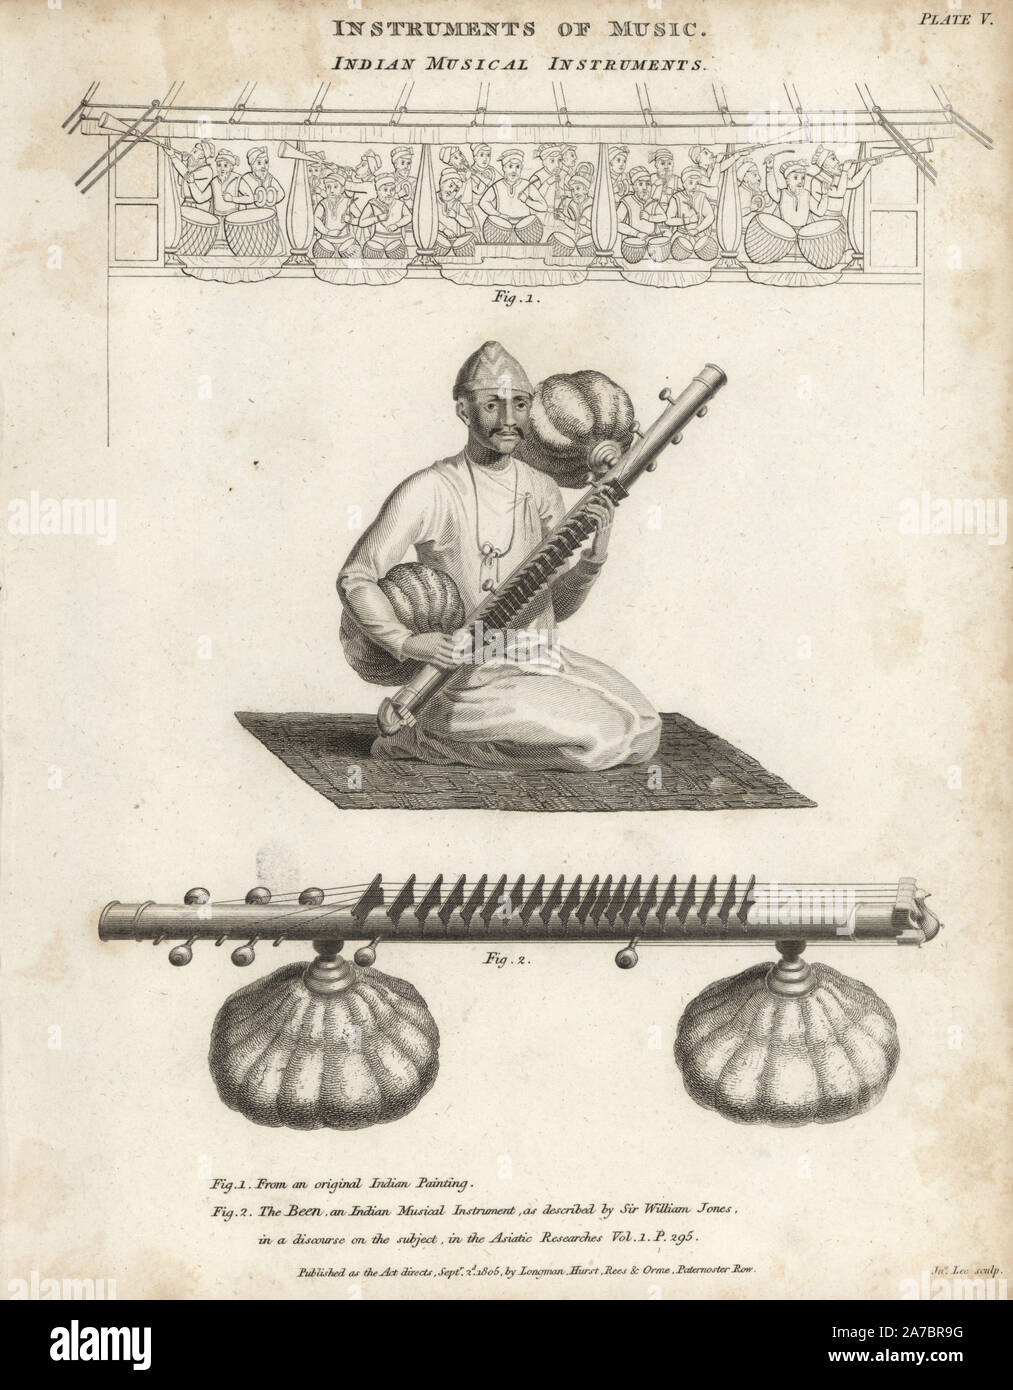 Indian musical instruments (drums, horns and cymbals) from an original painting (1), and the Been or rudra vina, as described by Sir William Jones in Asiatic Researches. Copperplate engraving by John Lee from Abraham Rees' Cyclopedia or Universal Dictionary of Arts, Sciences and Literature, Longman, Hurst, Rees, Orme and Brown, London, 1820. Stock Photo